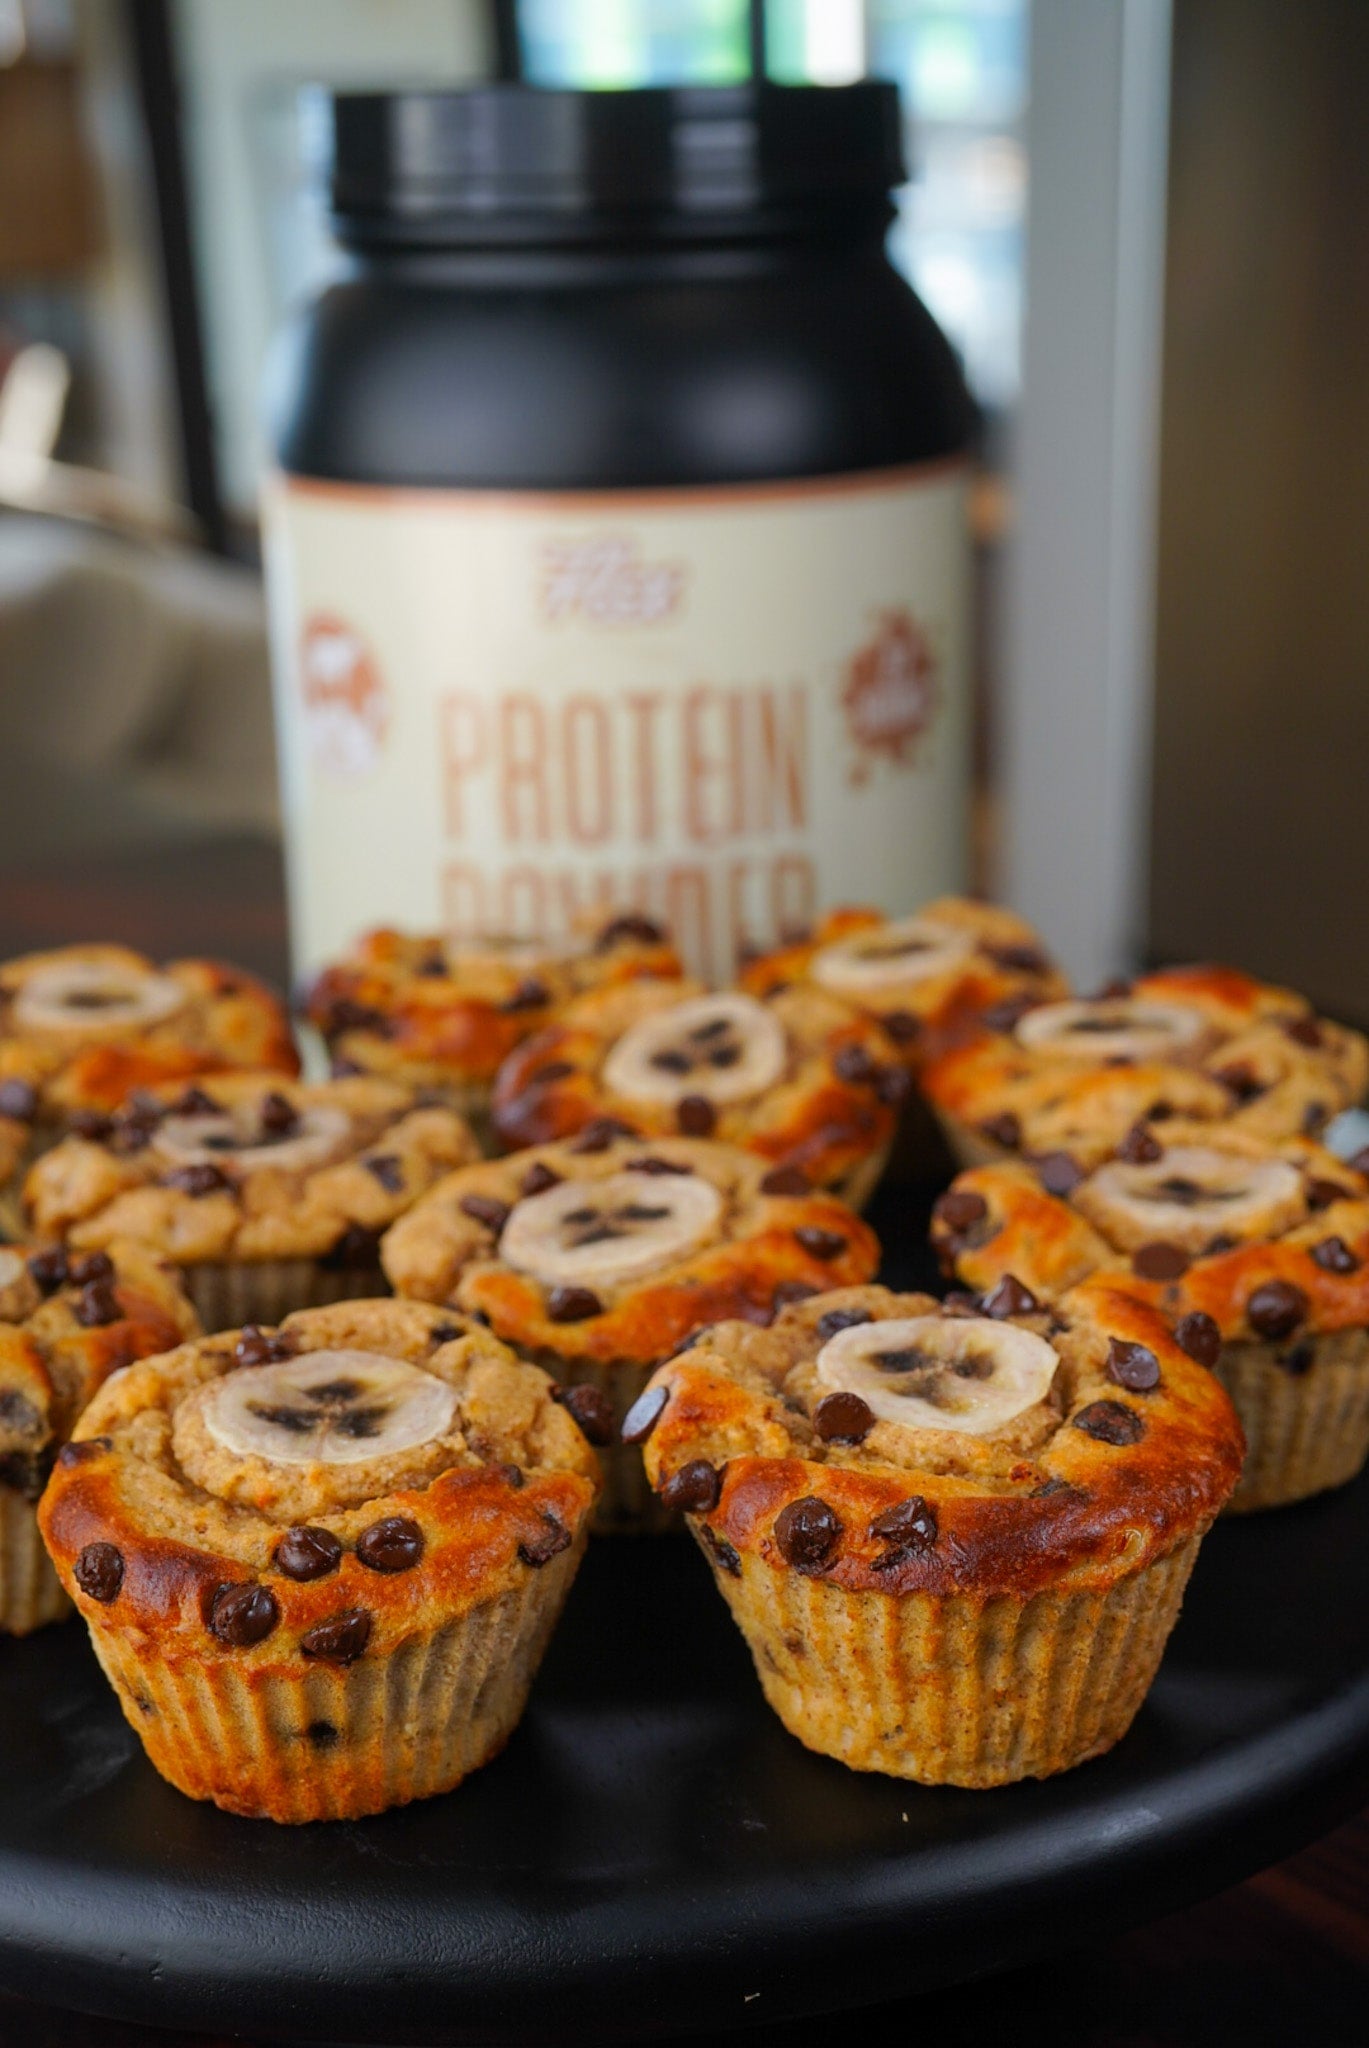 87 Cal Banana Chocolate Chip Protein Muffins